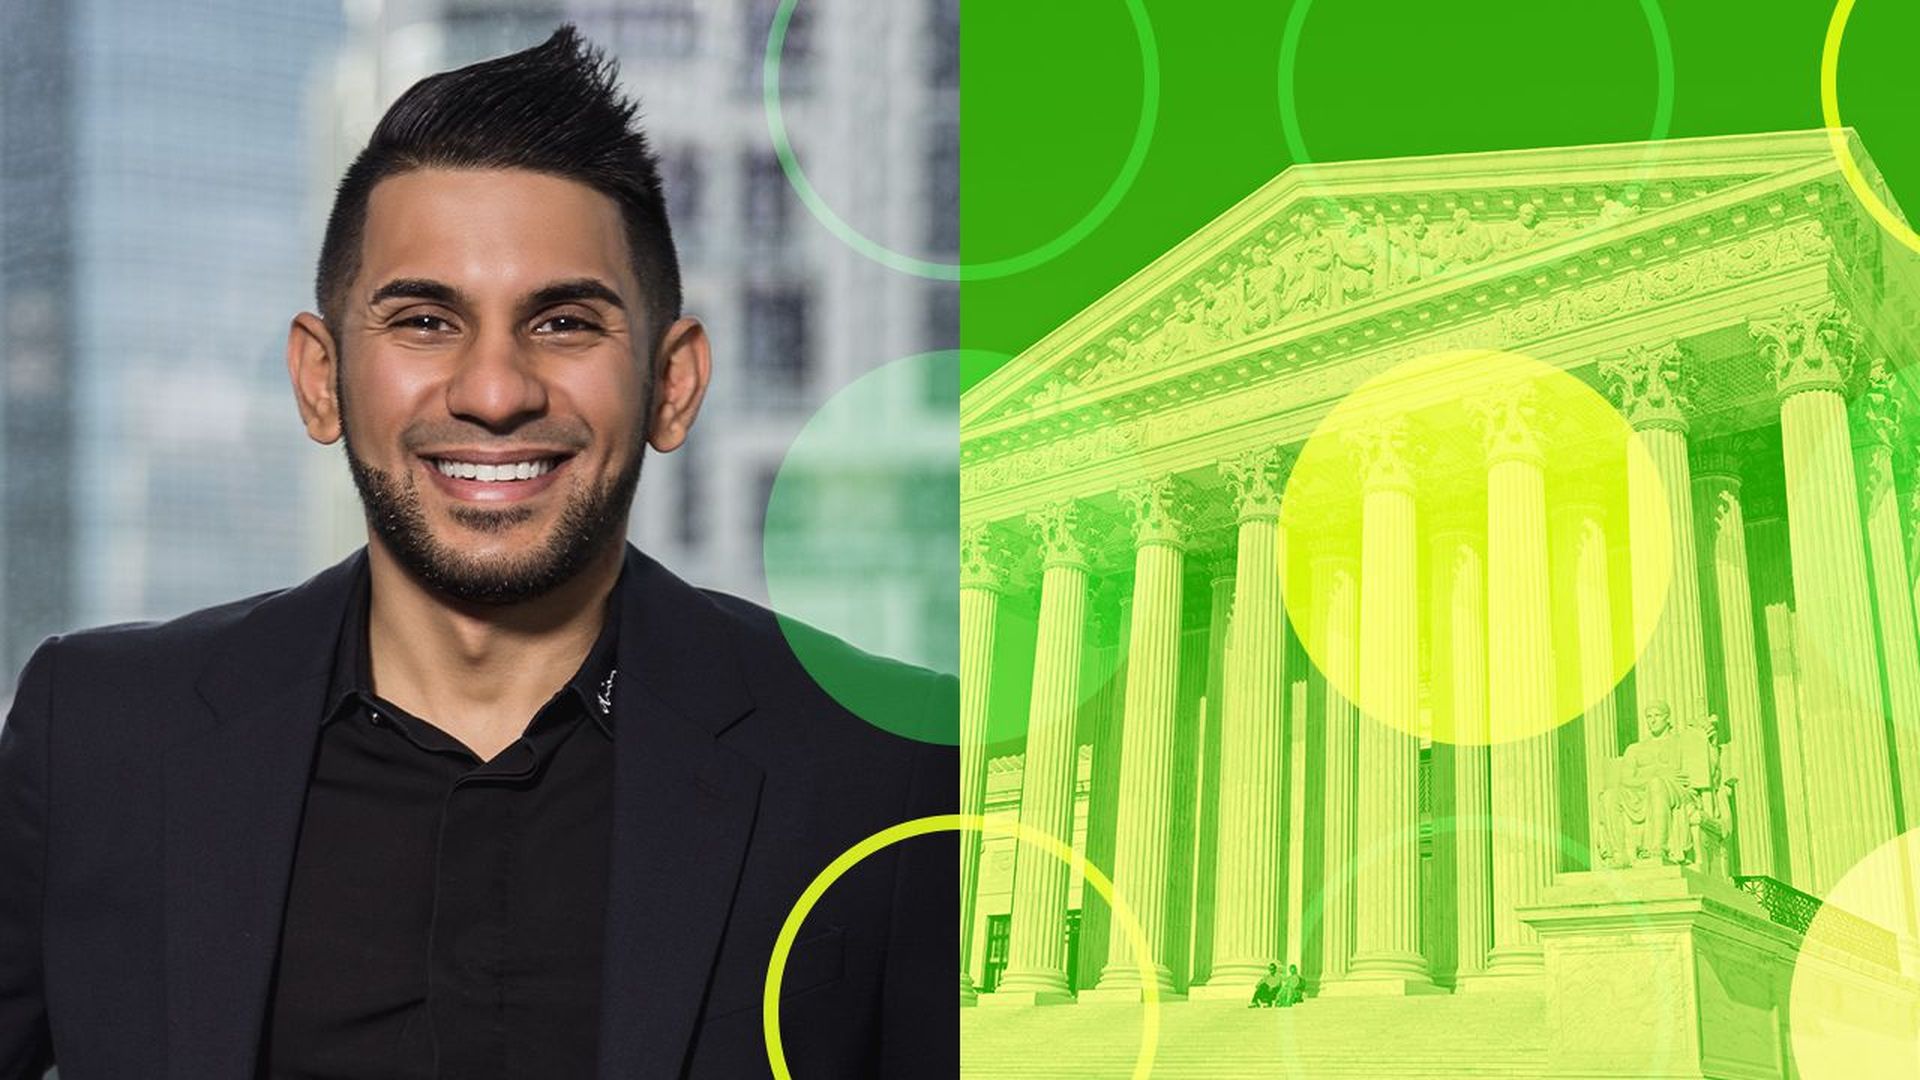 Photo Illustration of Fiyyaz Pirani next to the Supreme Court building with shapes overlayed